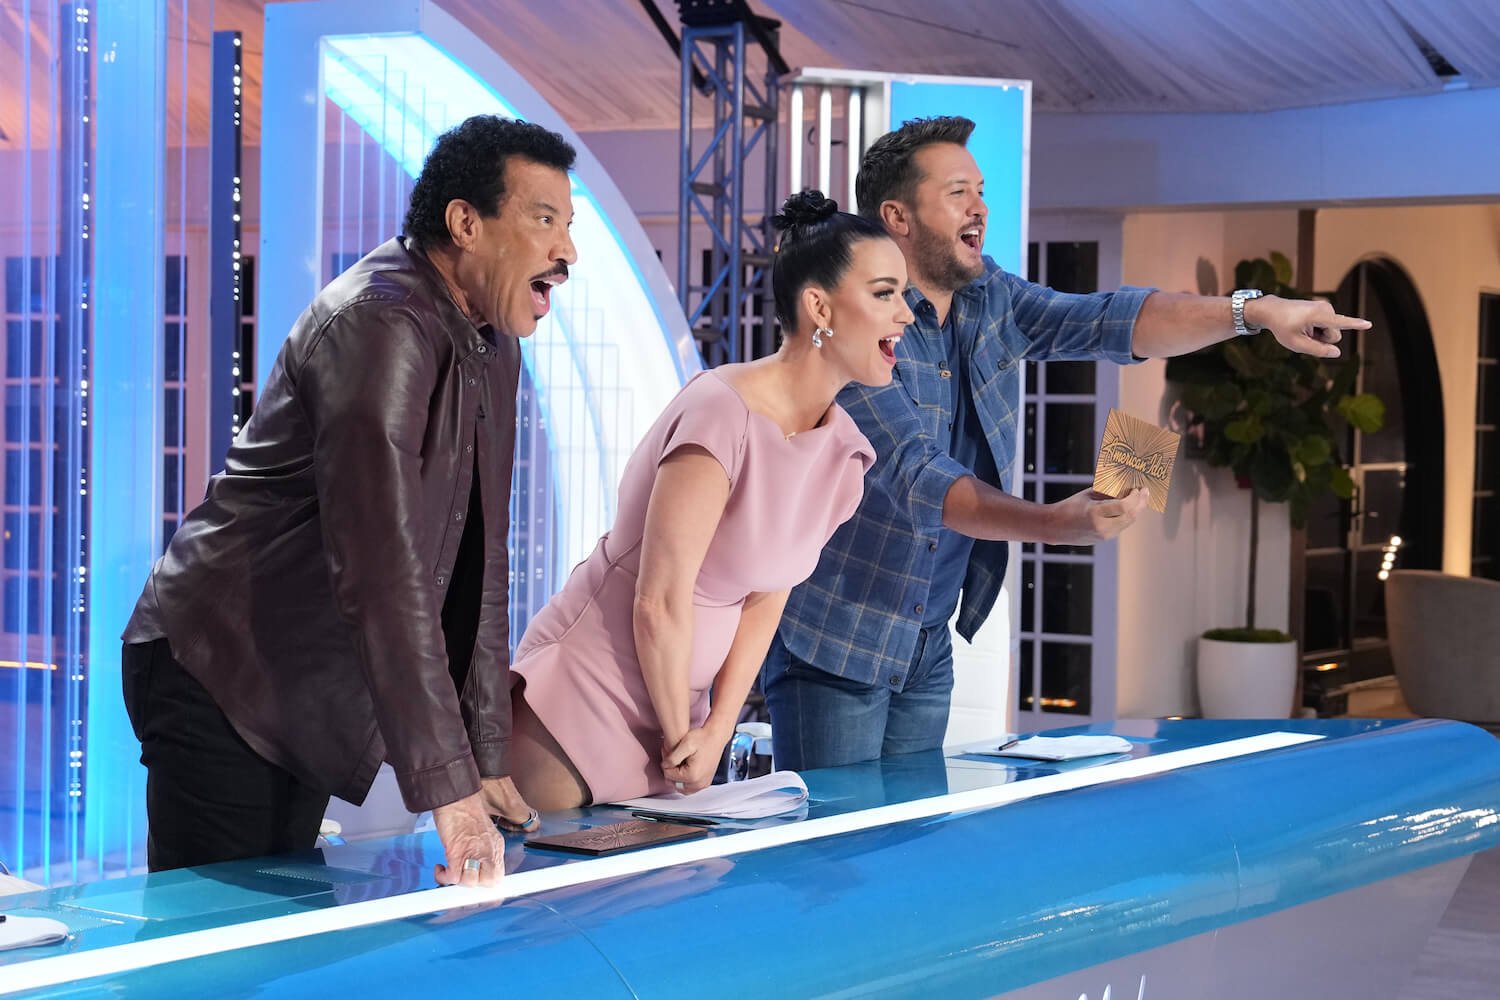 'American Idol' Season 22 judges Lionel Richie, Katy Perry, and Luke Bryan standing up and yelling during auditions